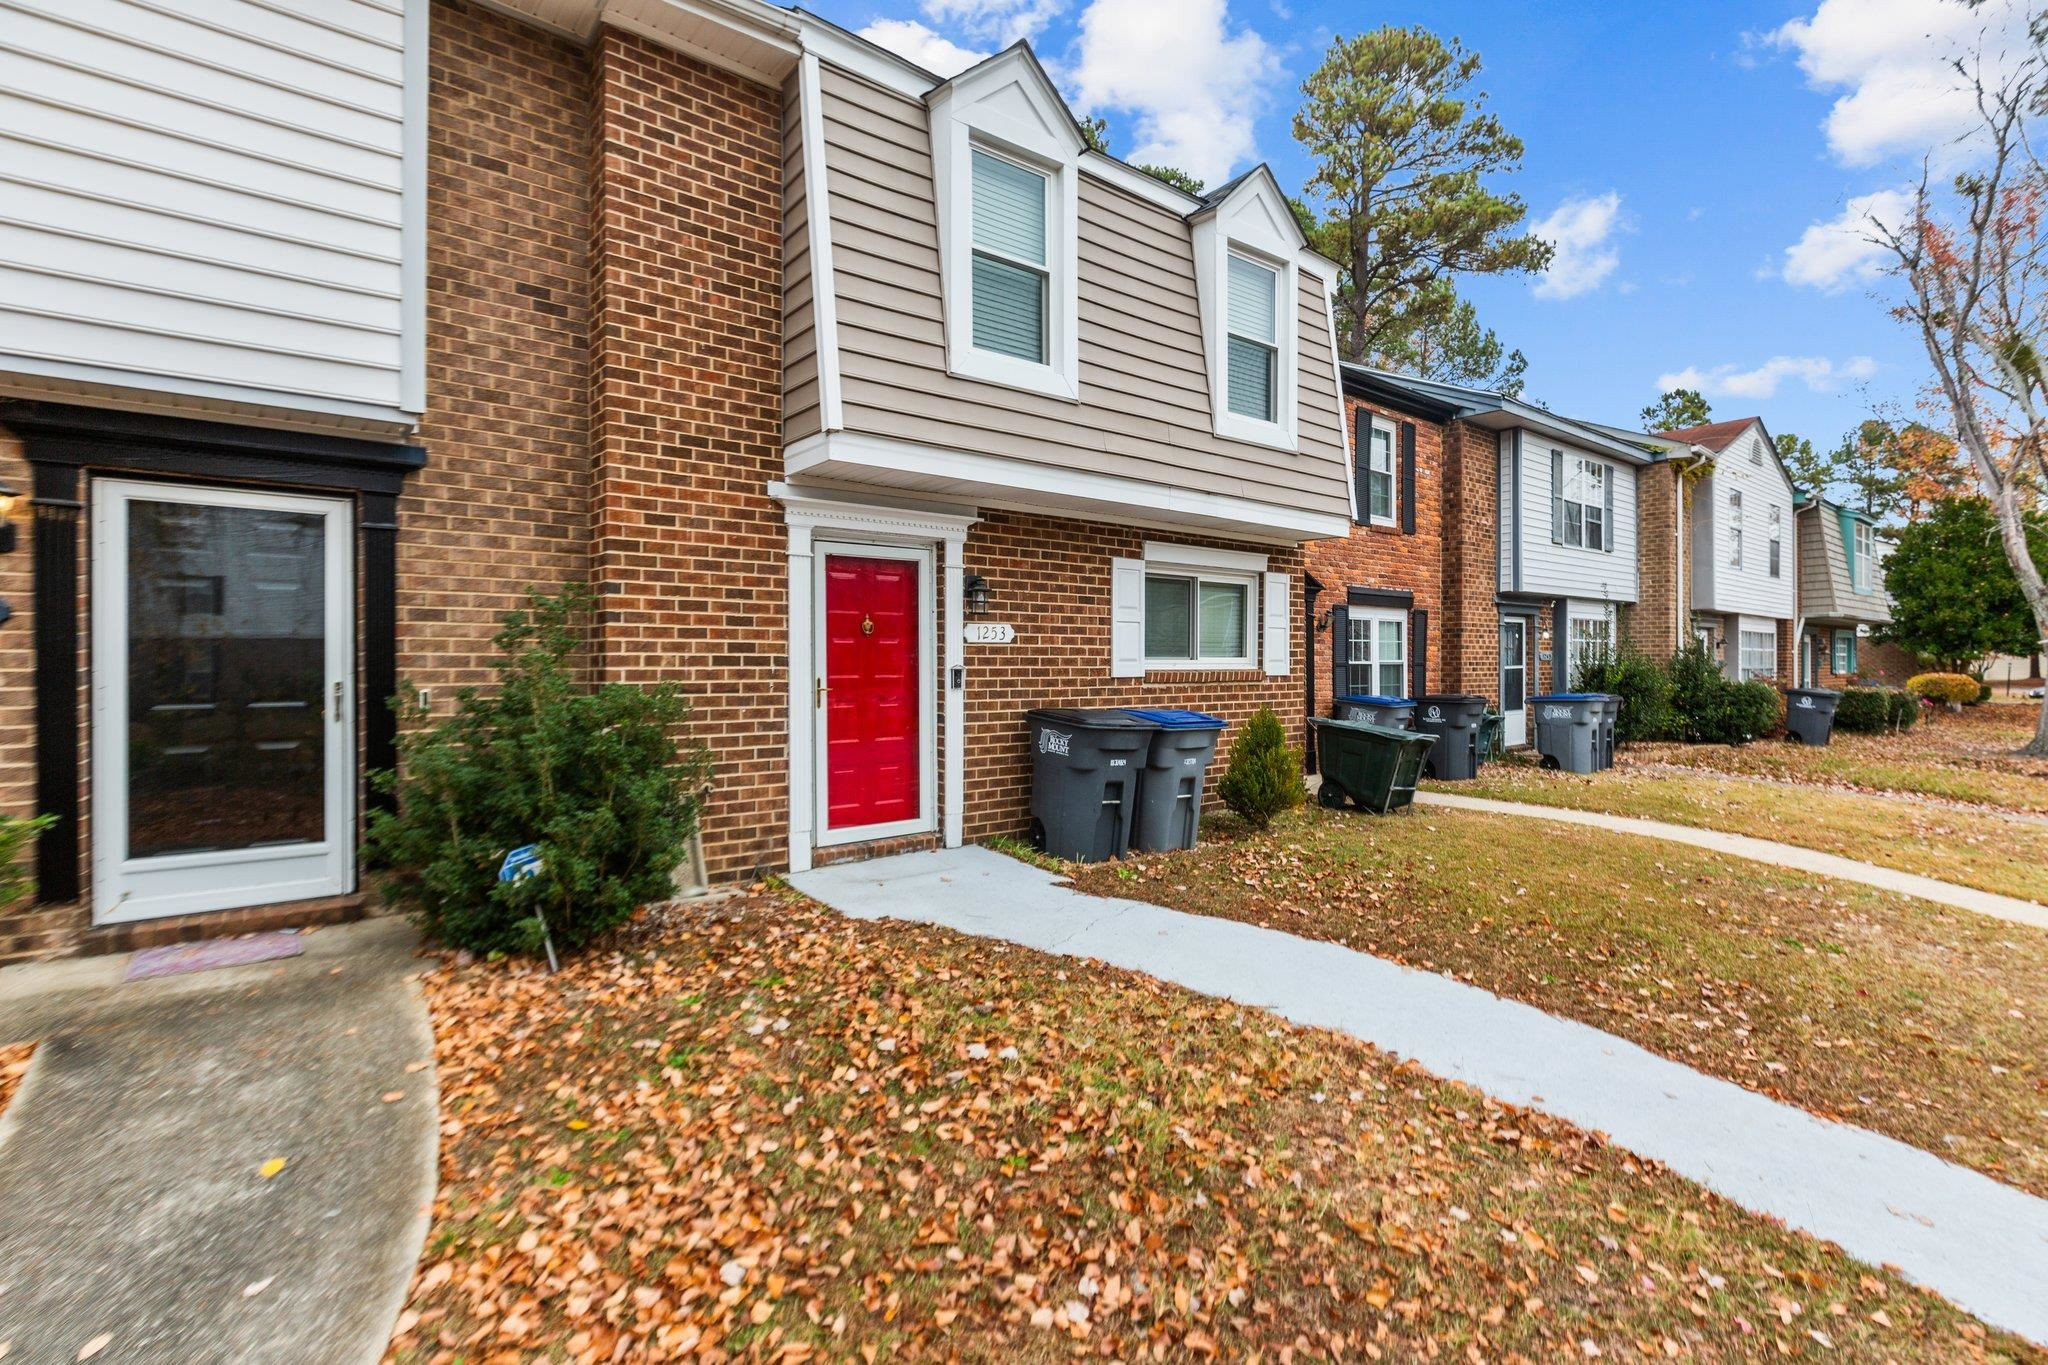 View Rocky Mount, NC 27804 townhome